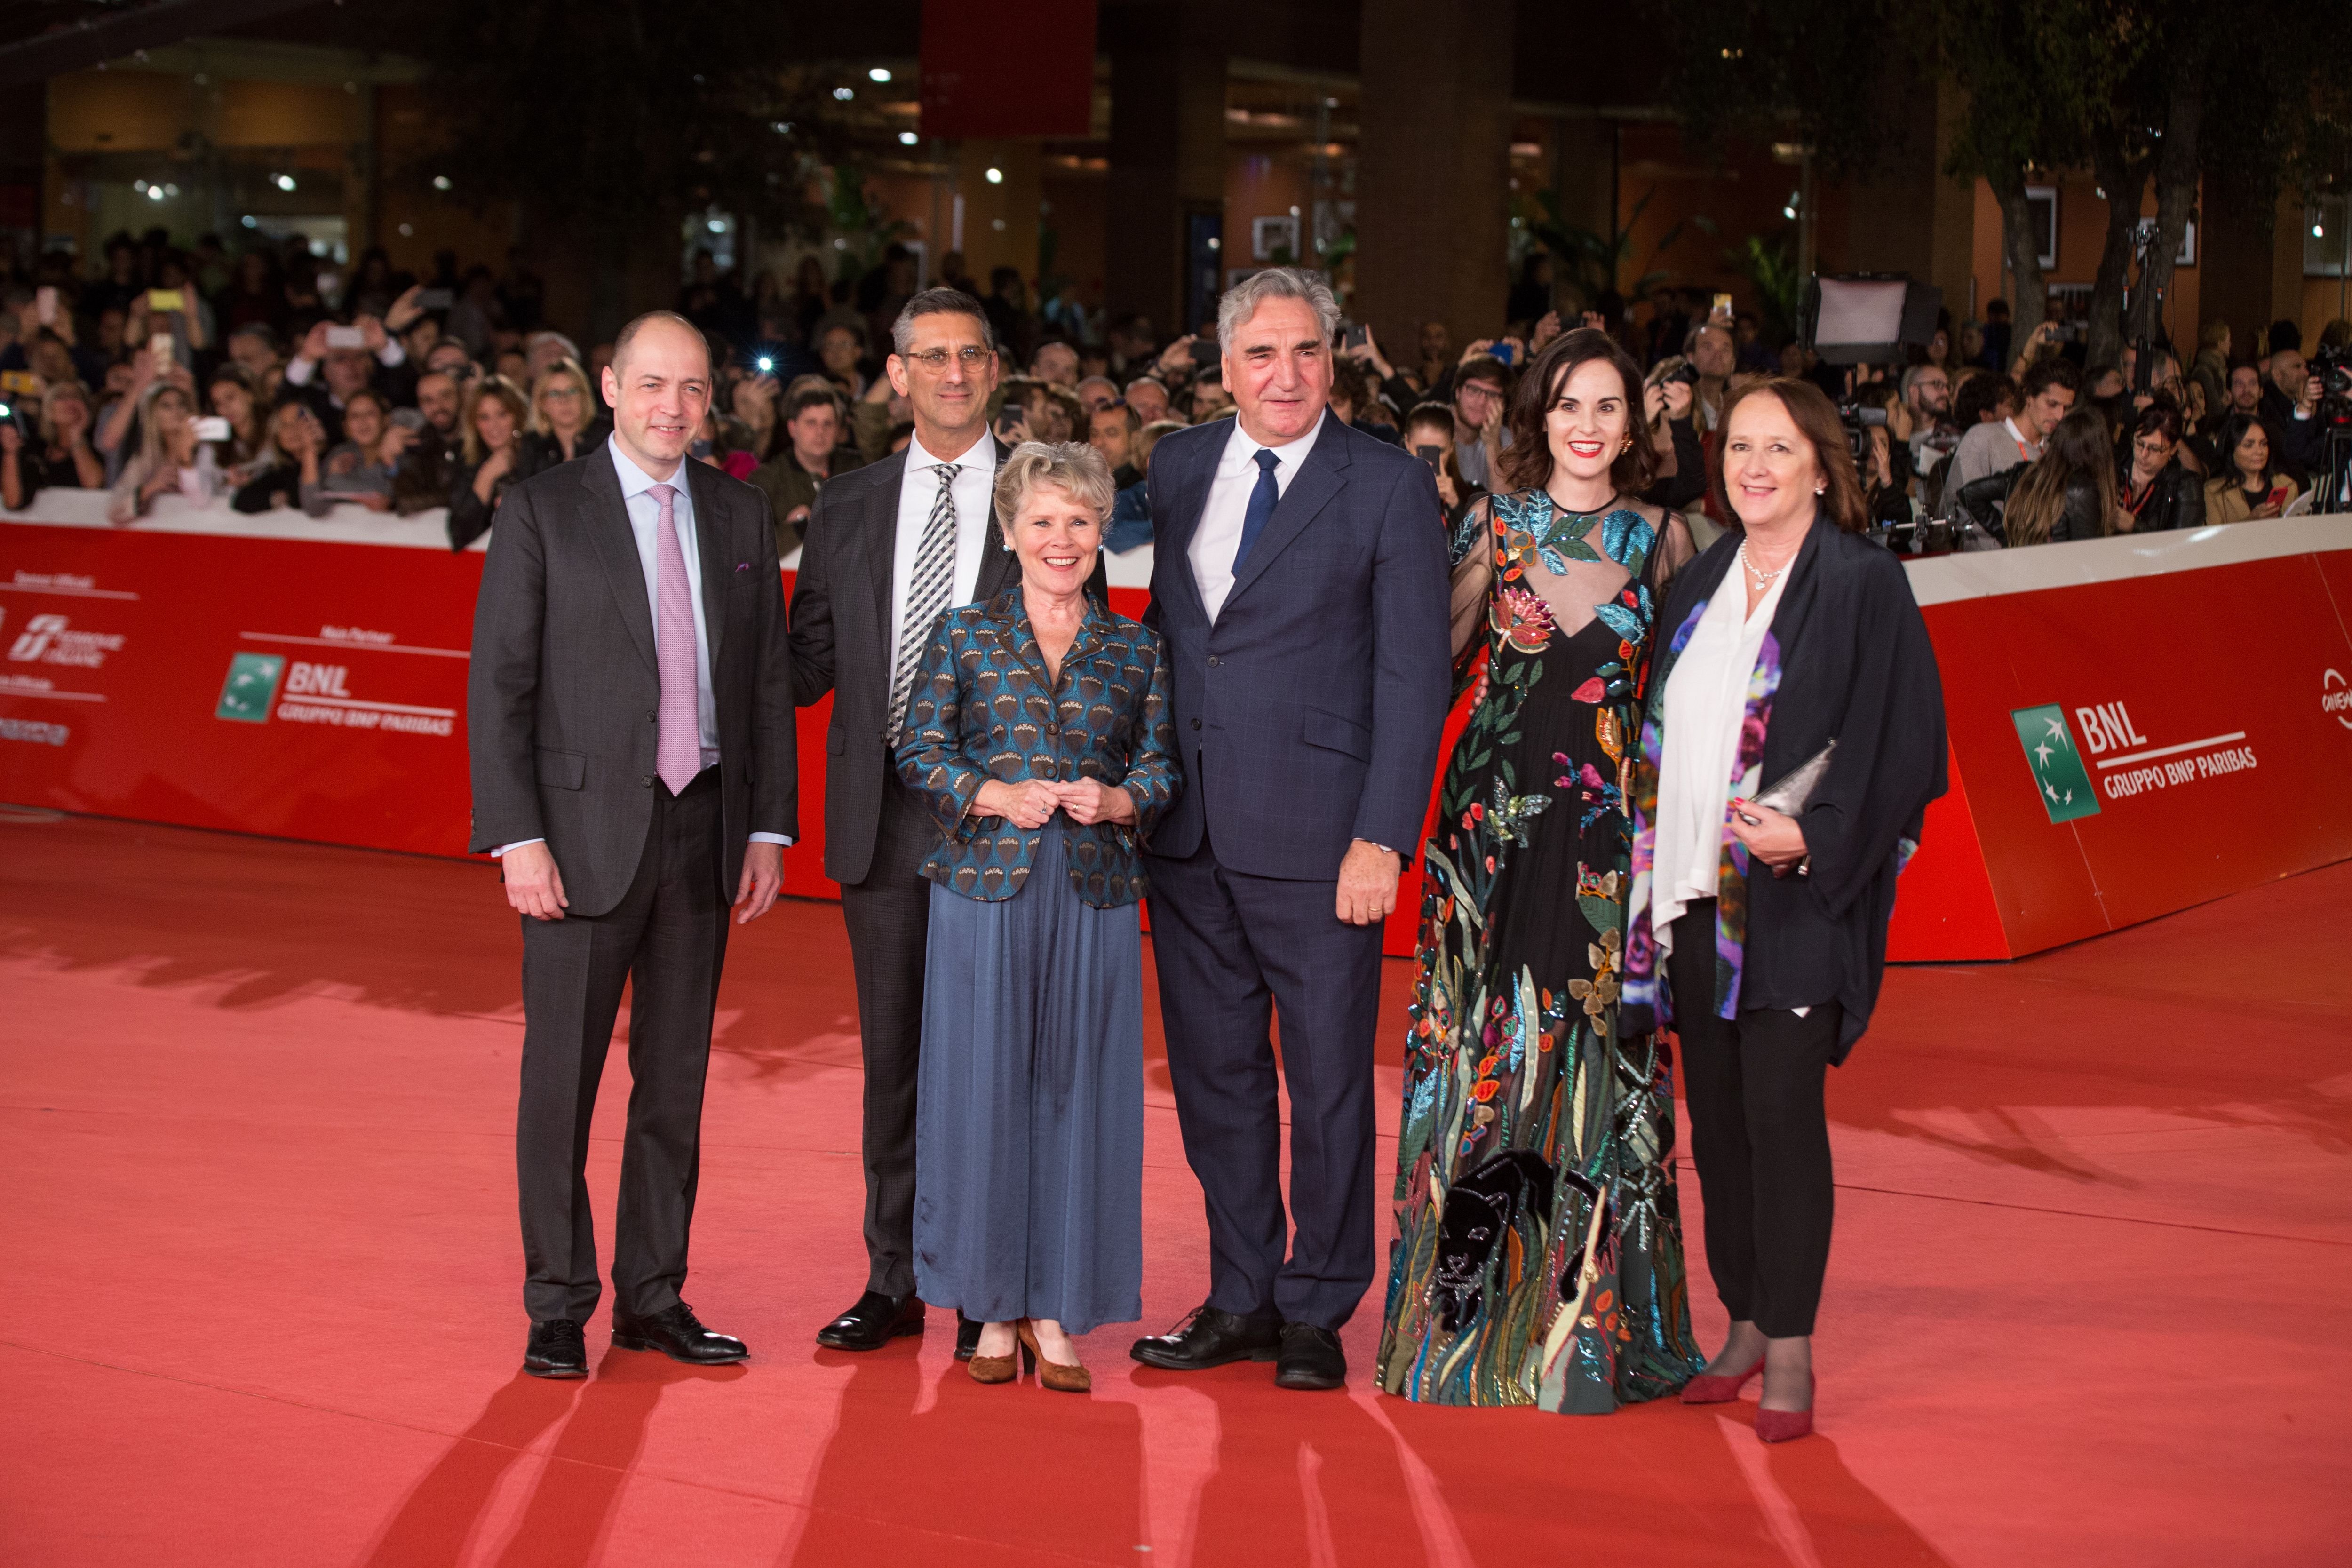 The Cast of "Downton Abbey" at the red carpet at the Rome Film Fest on  October 19, 2019 | Photo: Getty Images